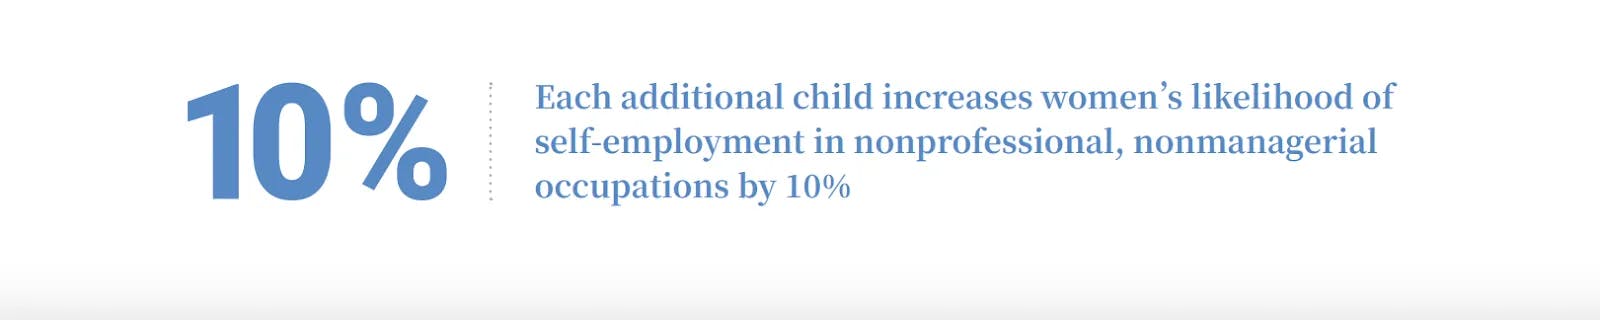 Each additional child increases women's likelihood of self-employment in nonprofessional, nonmanagerial occupations by 10%